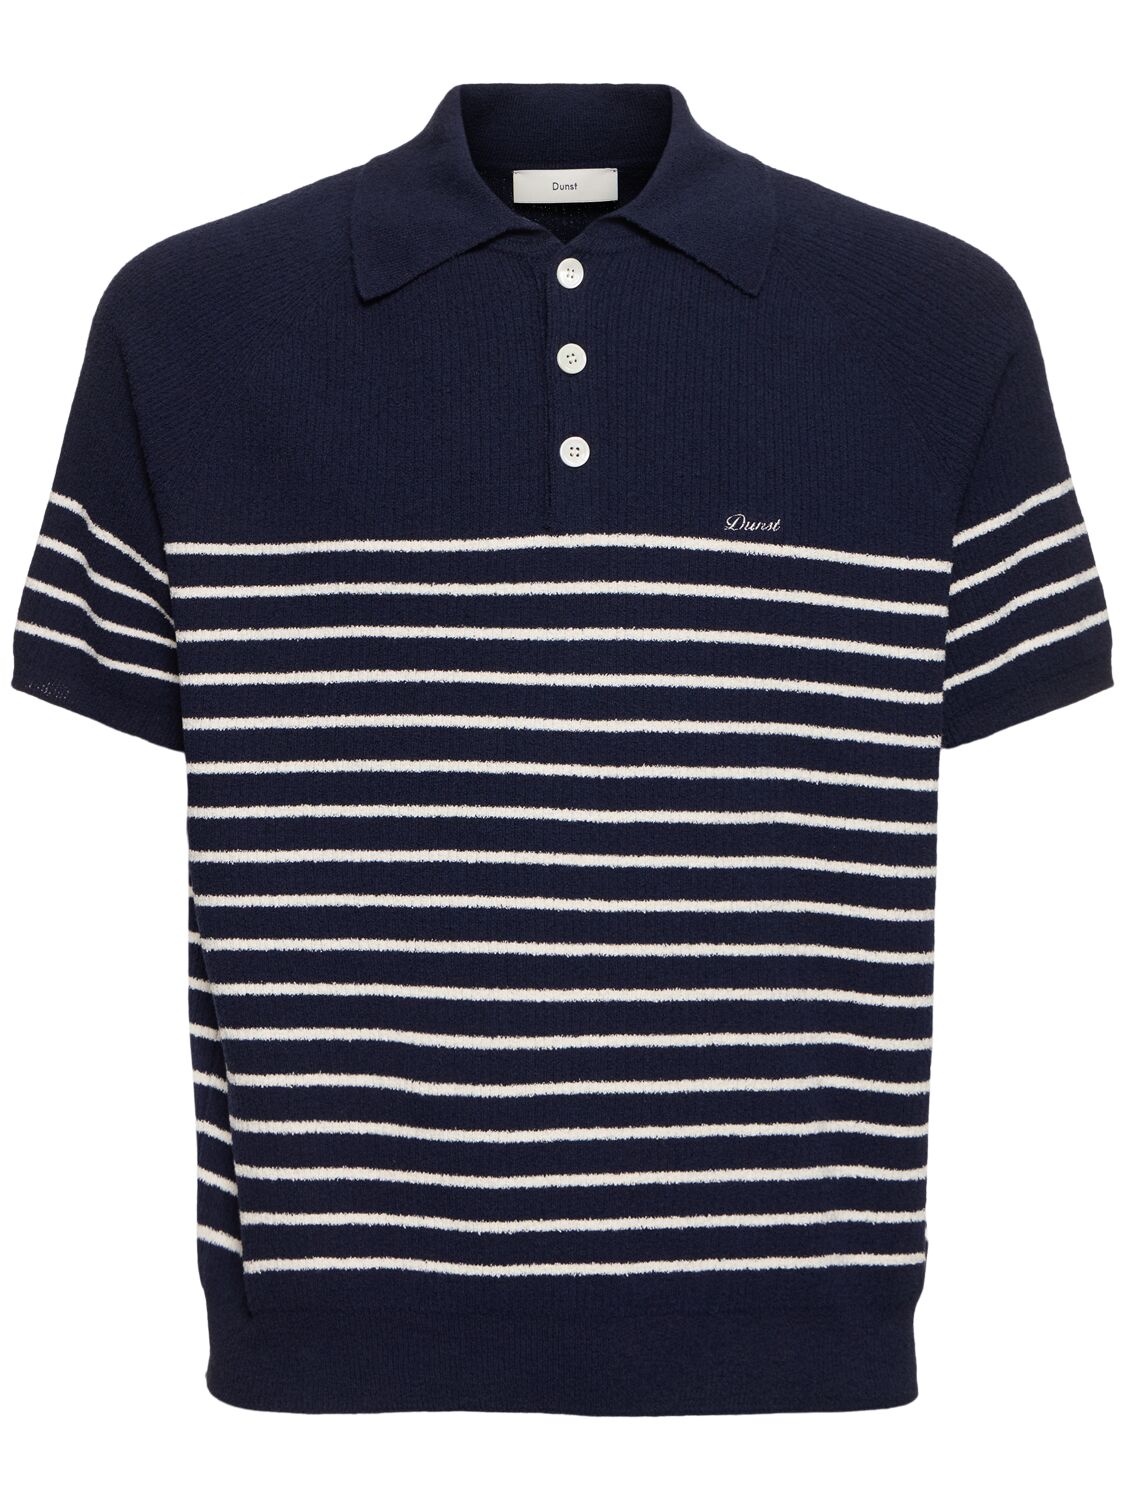 Shop Dunst Unisex Collared Stripe Knit Polo In Classic Navy